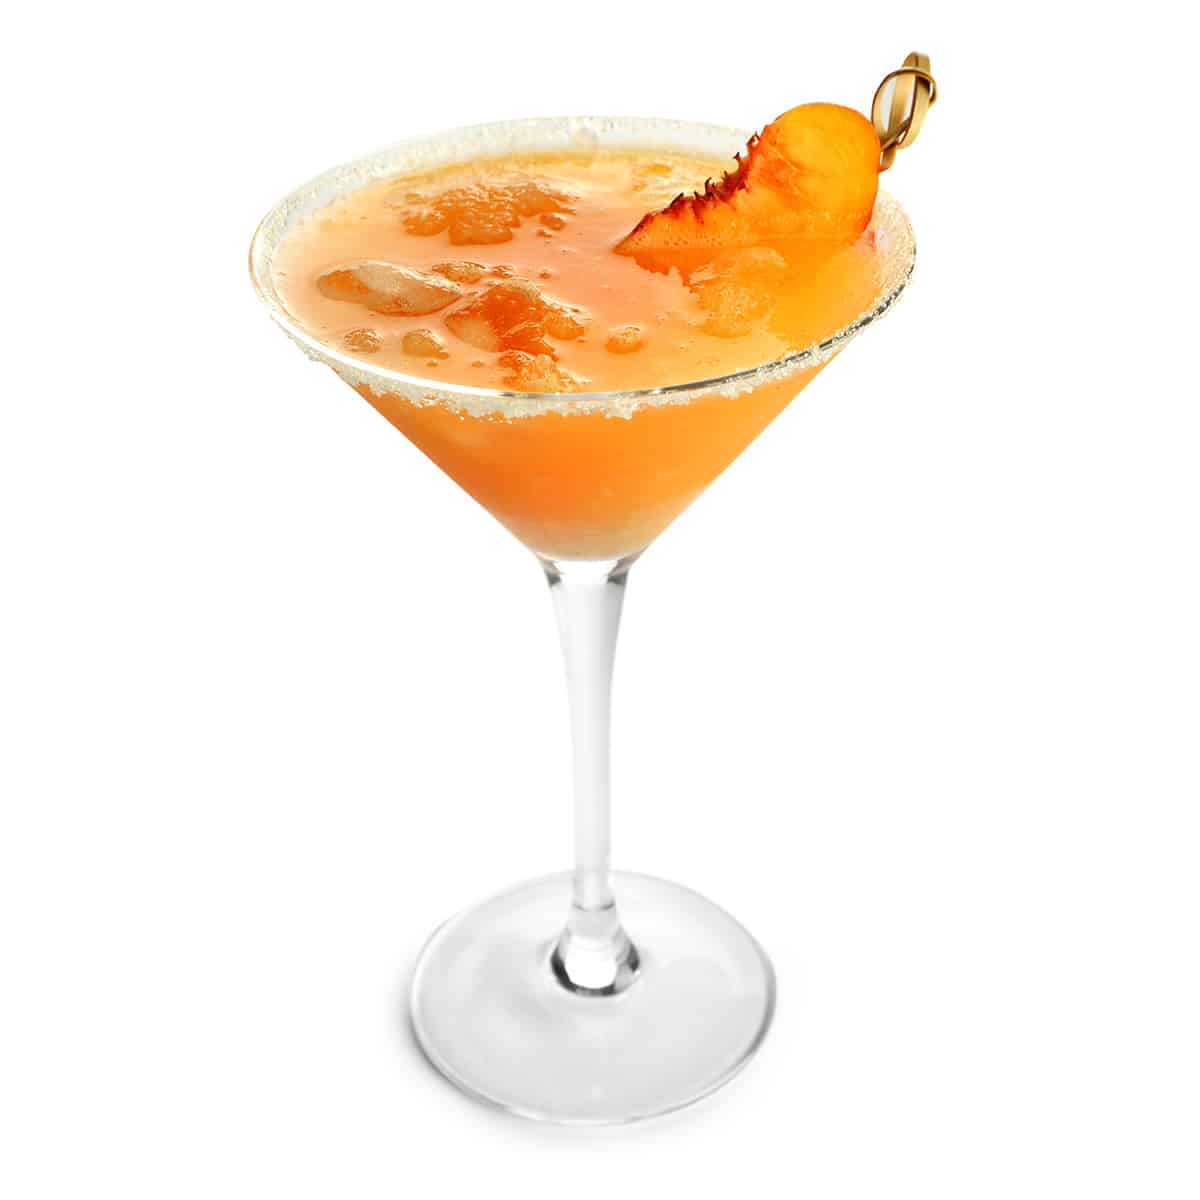 Out of Season: Rosemary Peach Margarita - 1.5oz Tequila, .75oz Rosemary Peach Syrup, .75oz Lime Juice